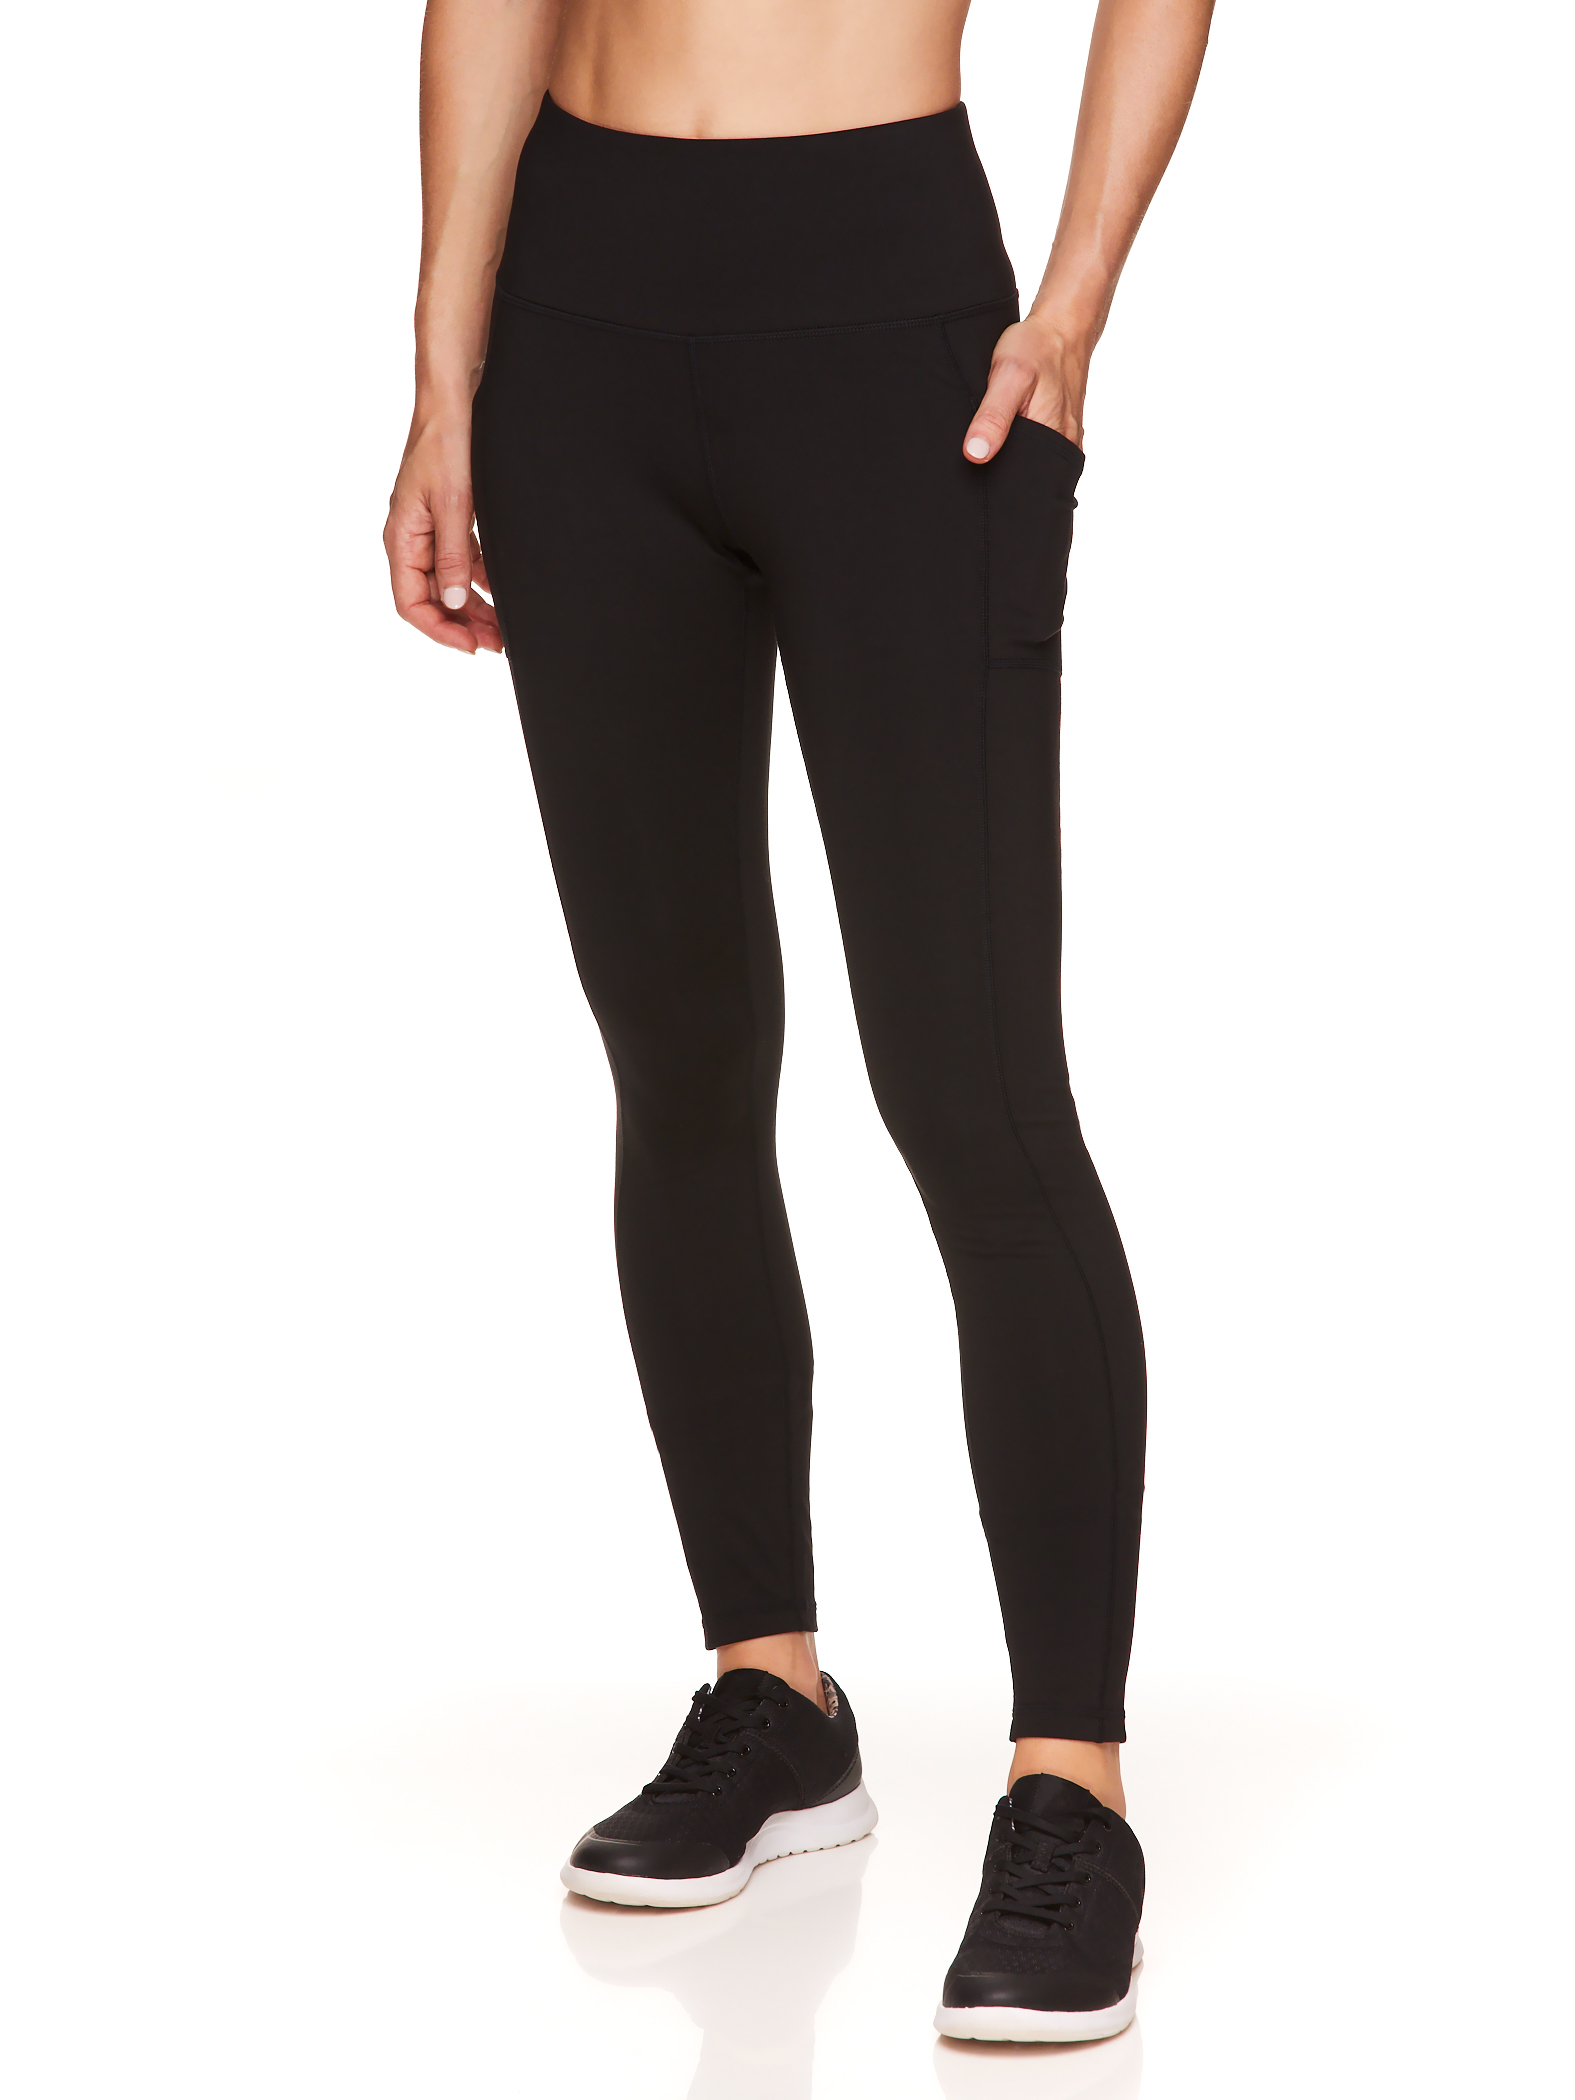 Reebok Women's Everyday High-Waisted Active Leggings with Pockets, 28" Inseam - image 2 of 4